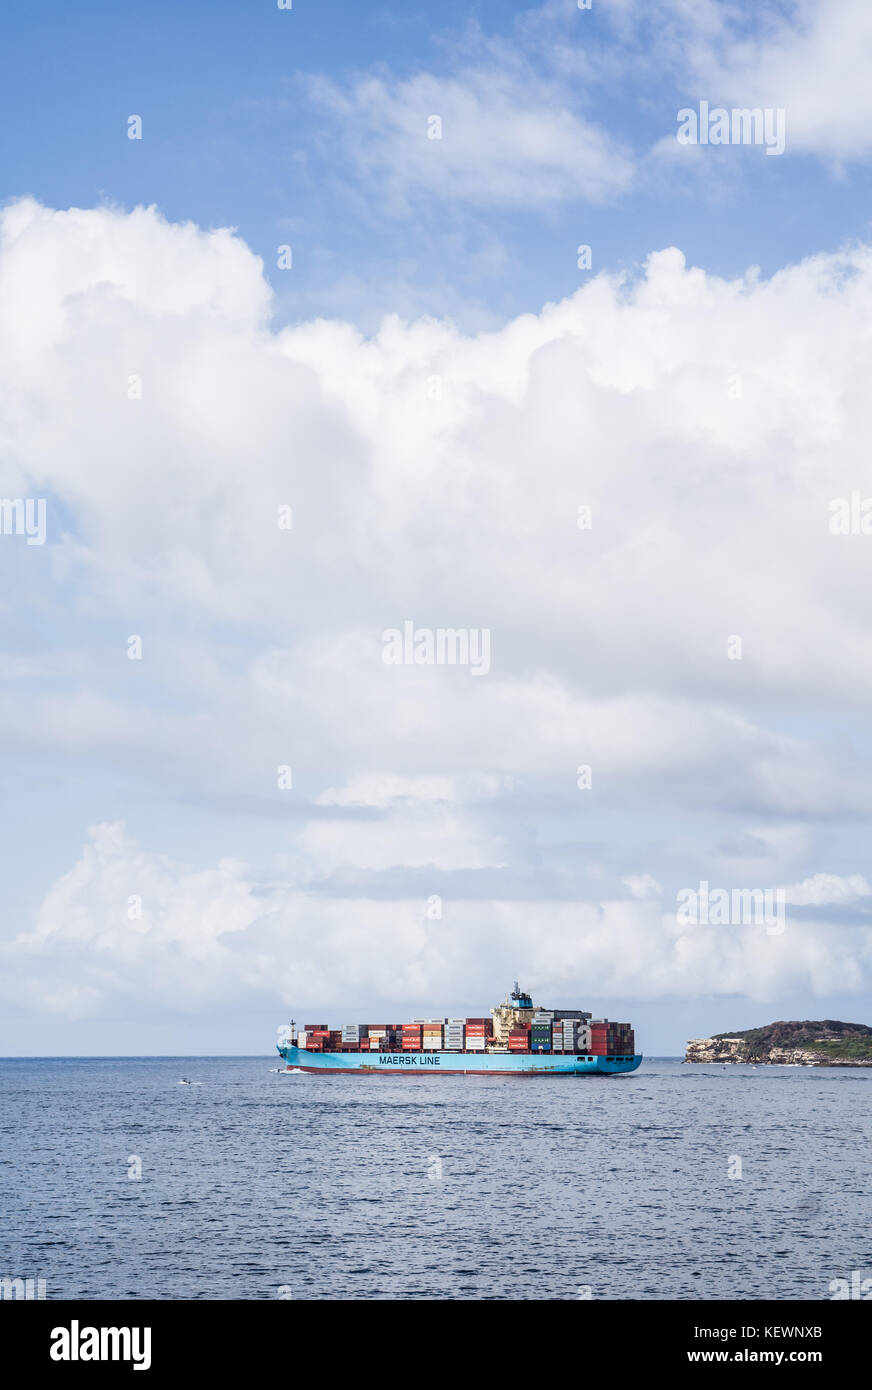 A container ship steams out of Botany Bay, Australia Stock Photo